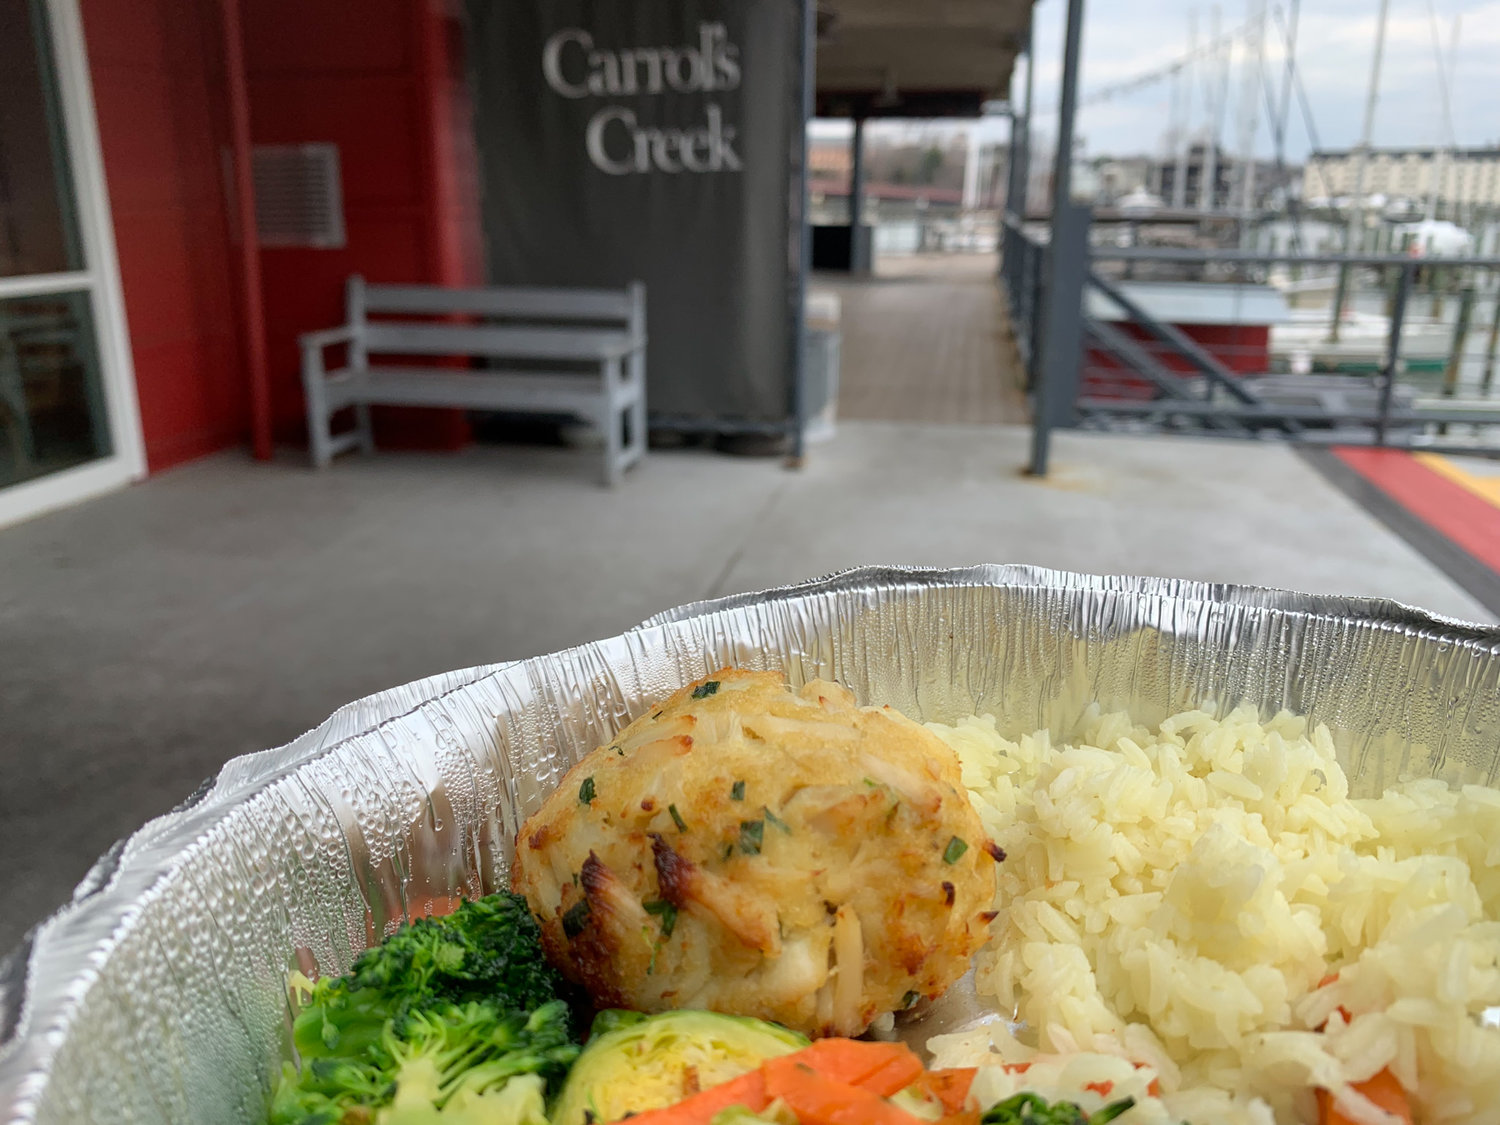 The crab cake at Carrol’s Creek Cafe is minimally processed, with hardly any filler, if at all, with tiny scallions and an almost creamy, slightly sweet taste.